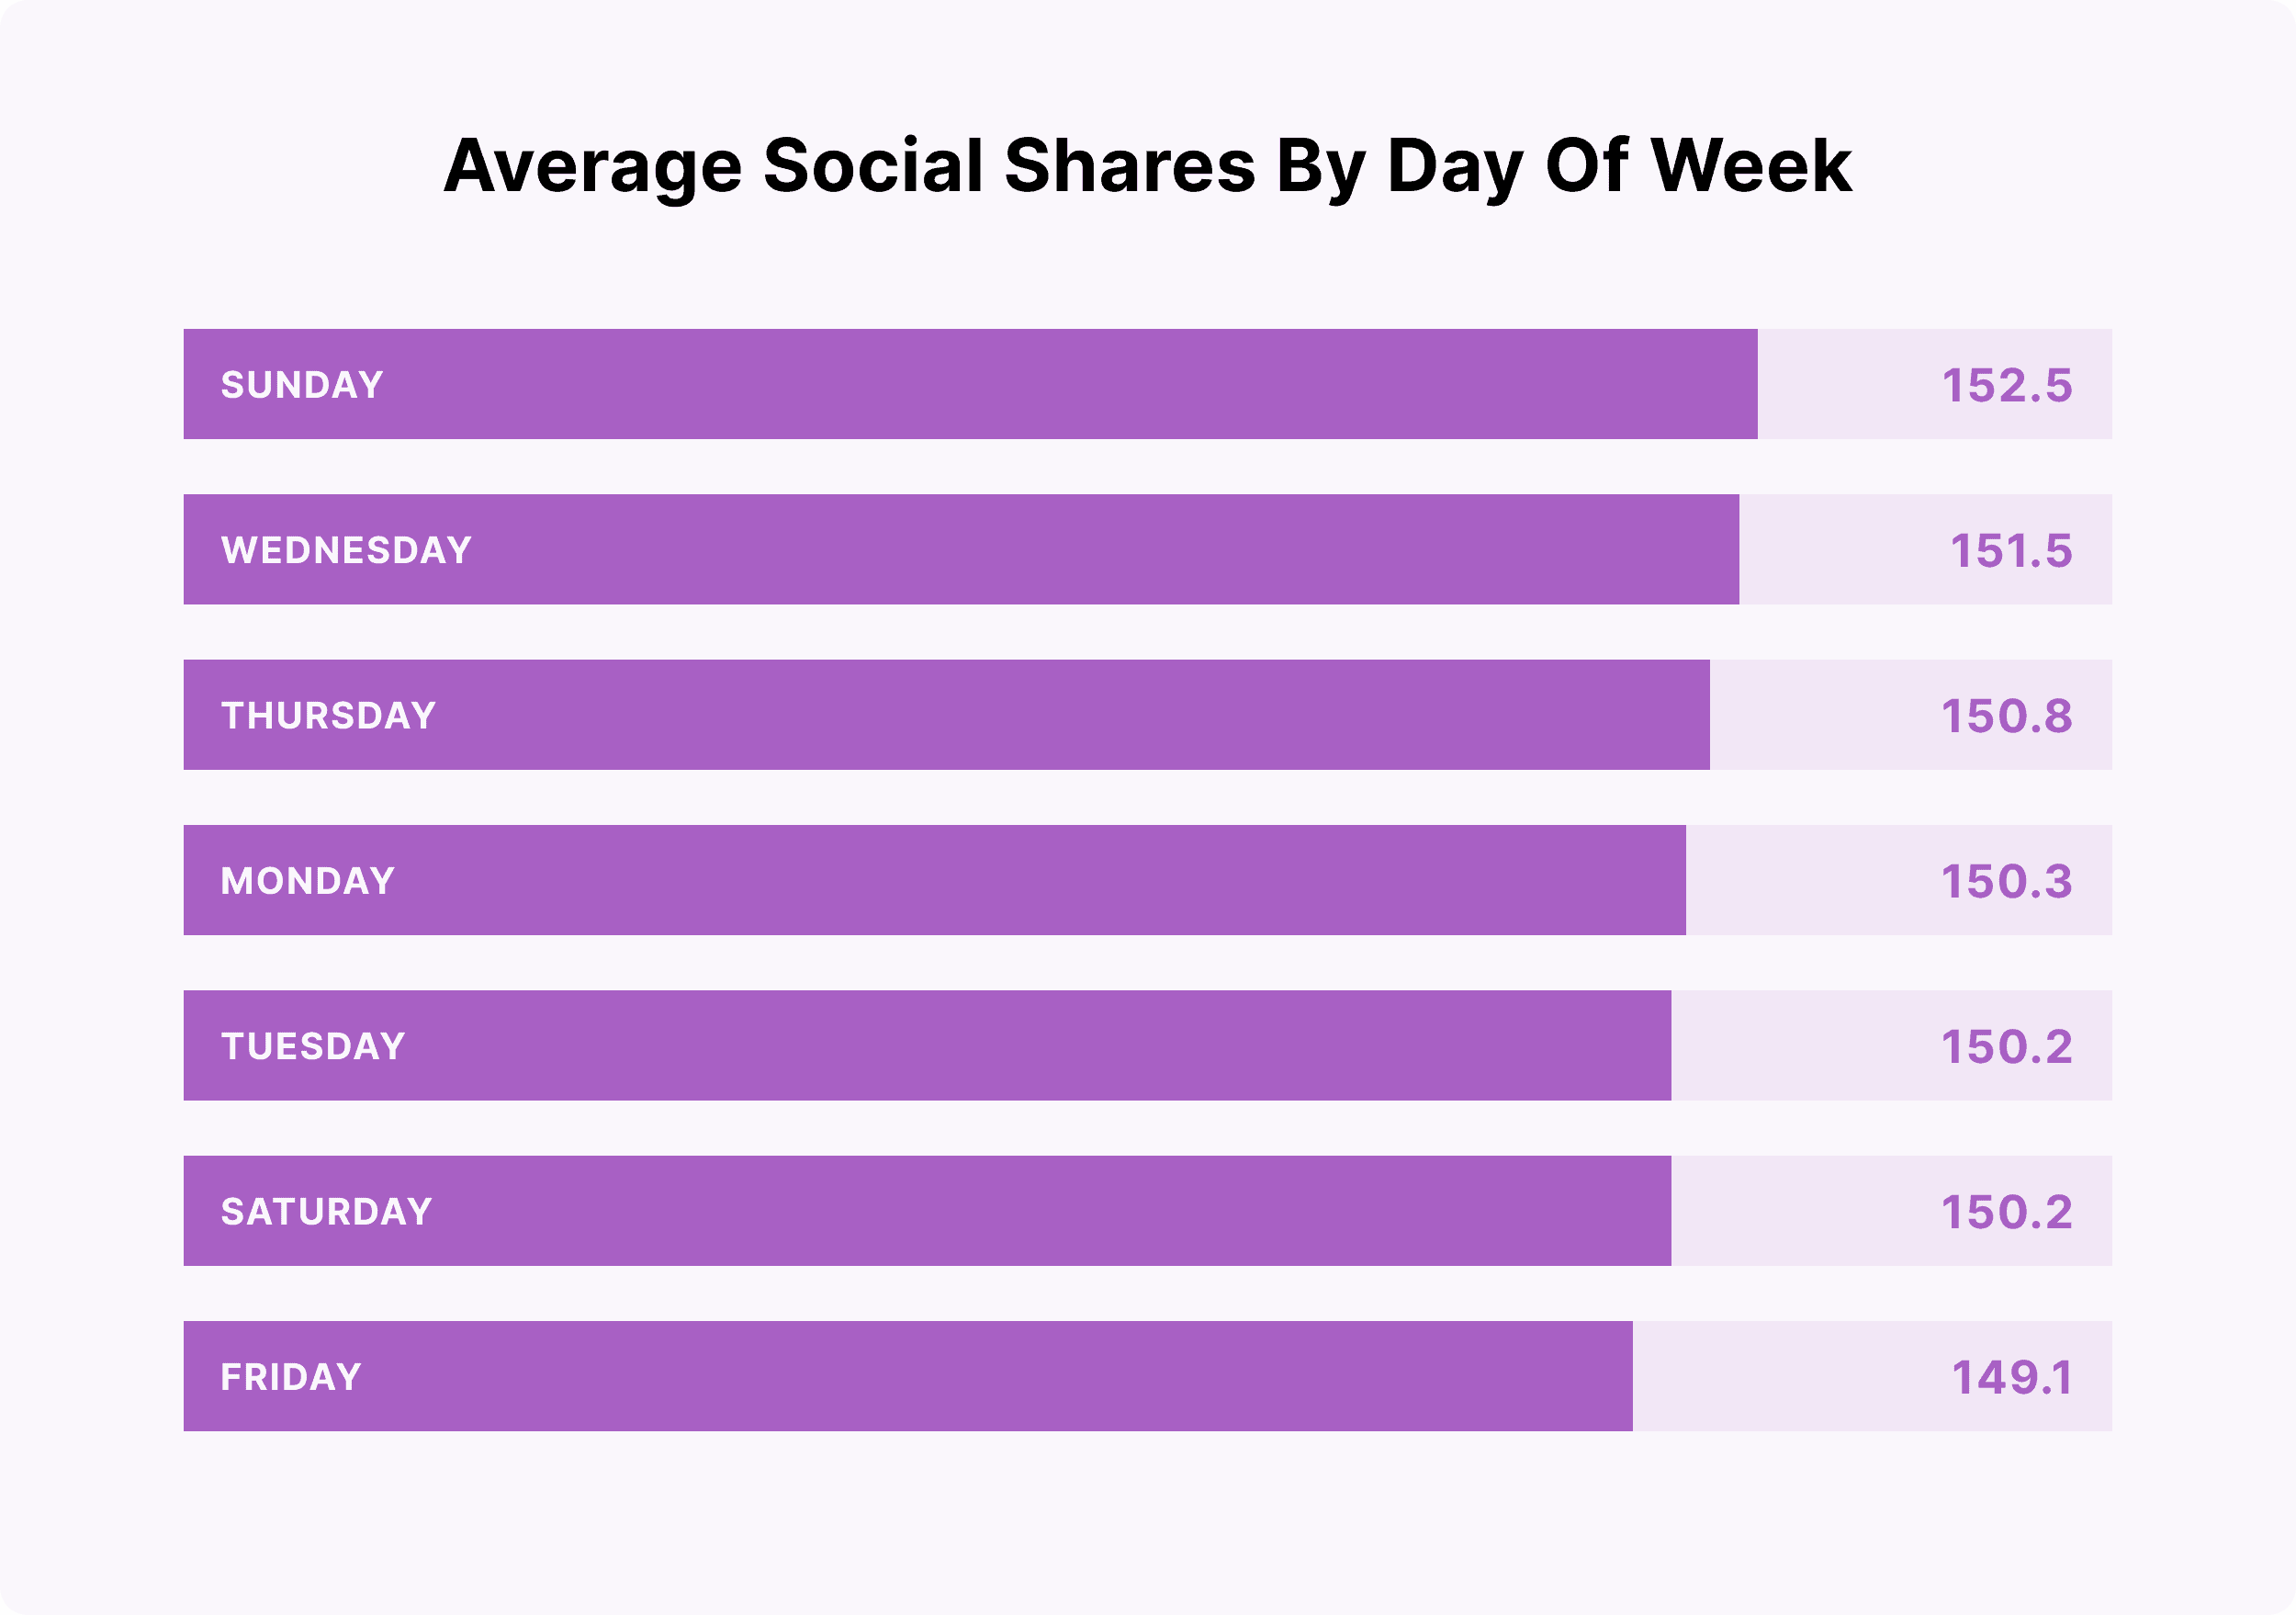 Average social shares by day of week